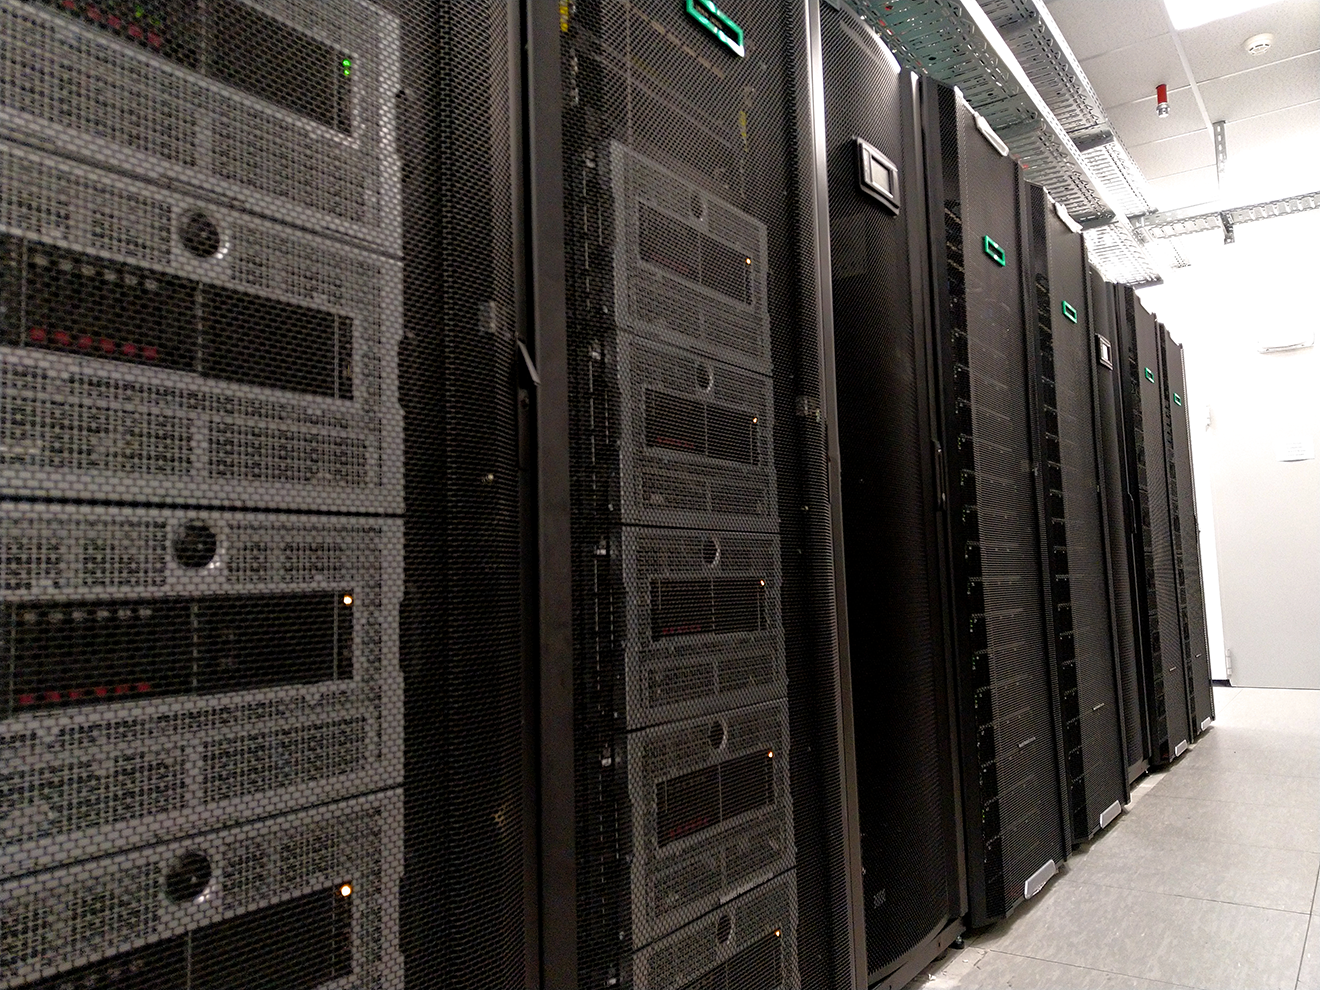 The new Supercomputer HEMUS was put into operation at IICT-BAS